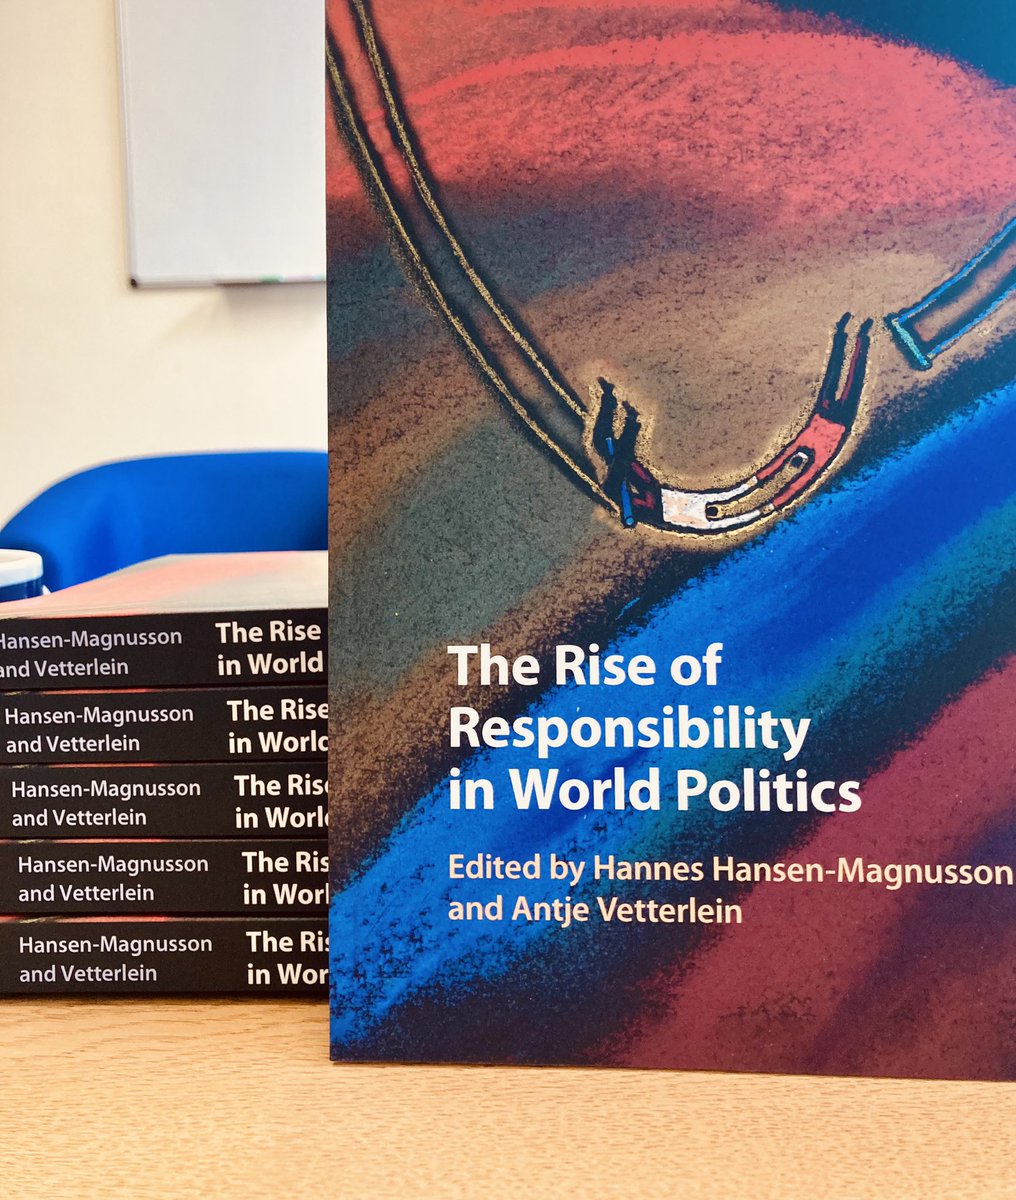 Fittlingly, The Rise of Responsibility is now out in paperback @CUP_PoliSci